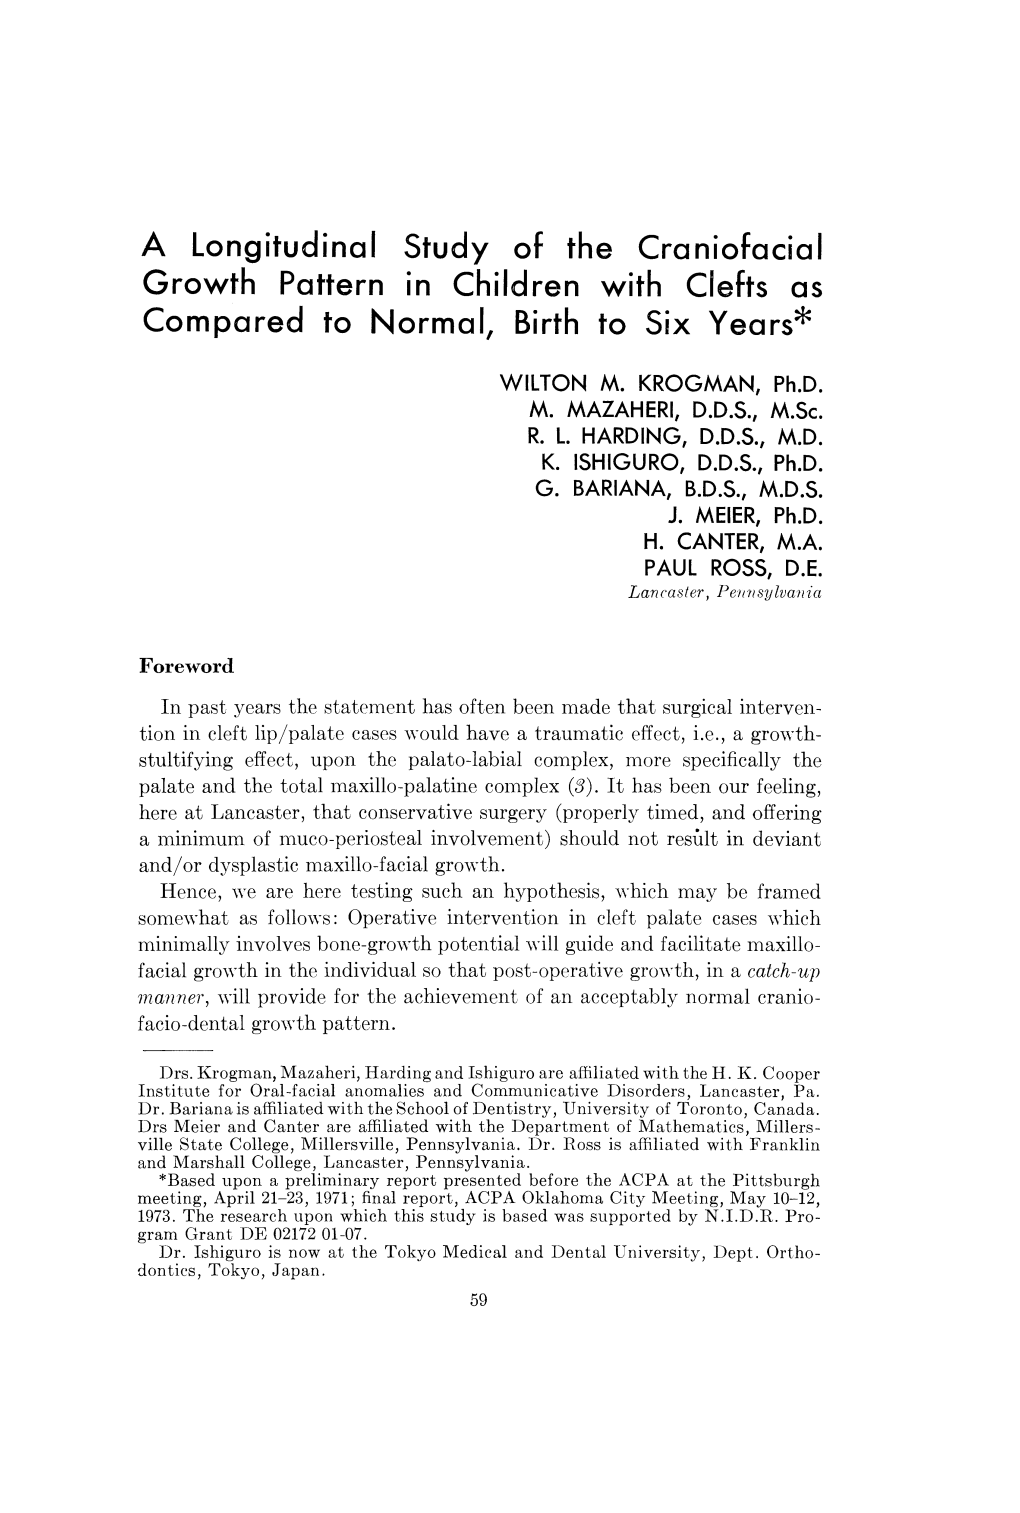 A Longitudinal Study of the Craniofacial Growth Pattern In